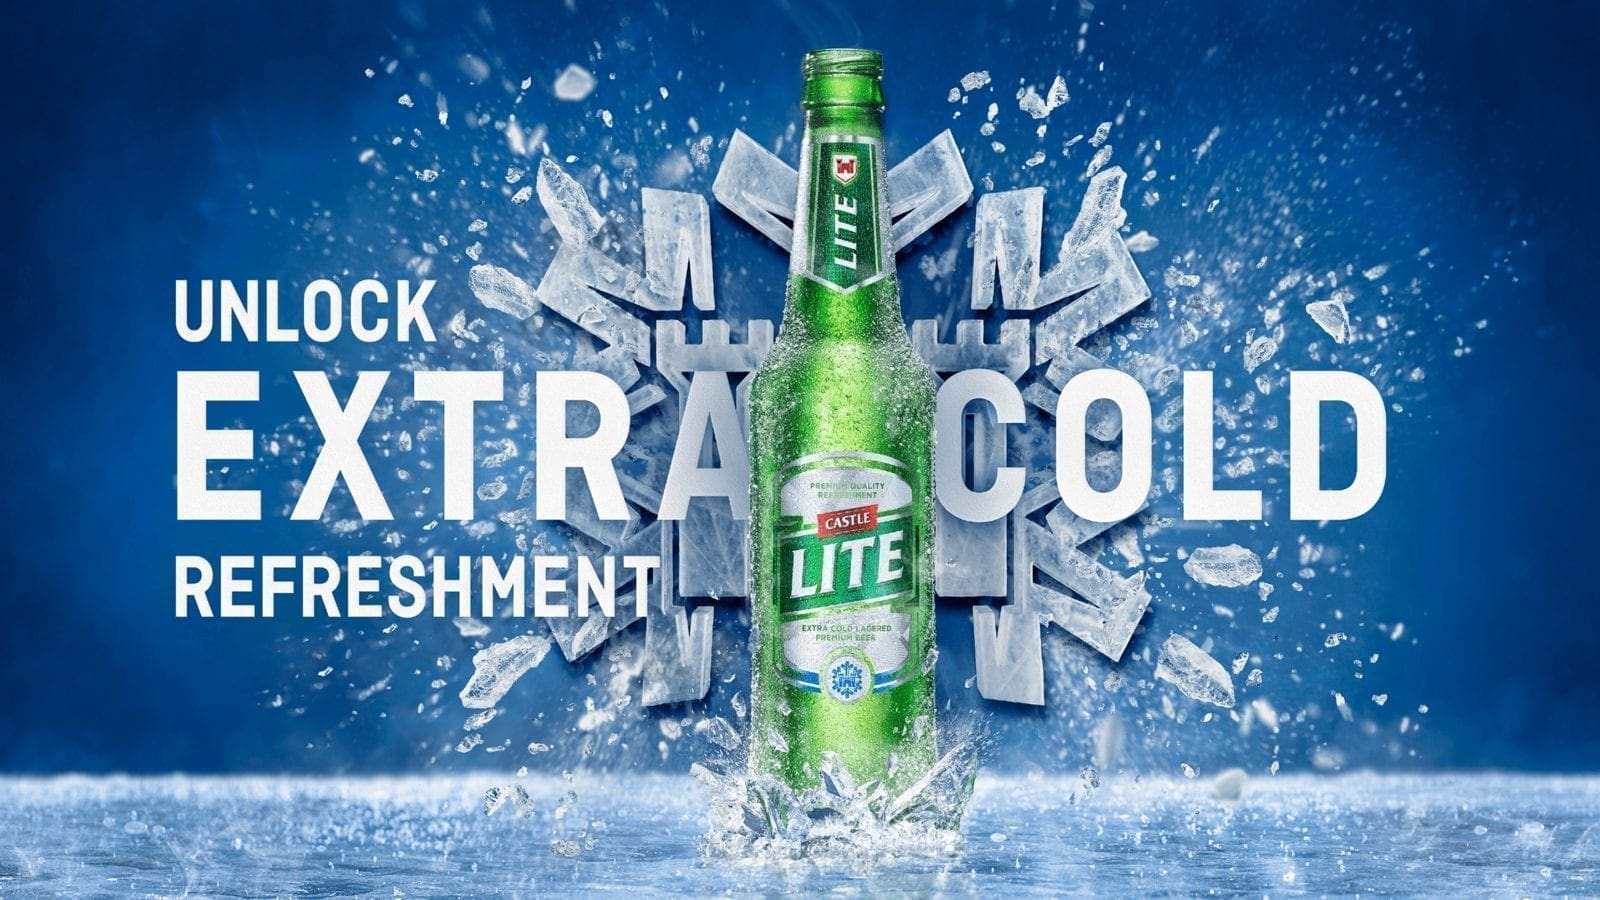 South Africa Breweries switches to renewable energy in production of Castle Lite